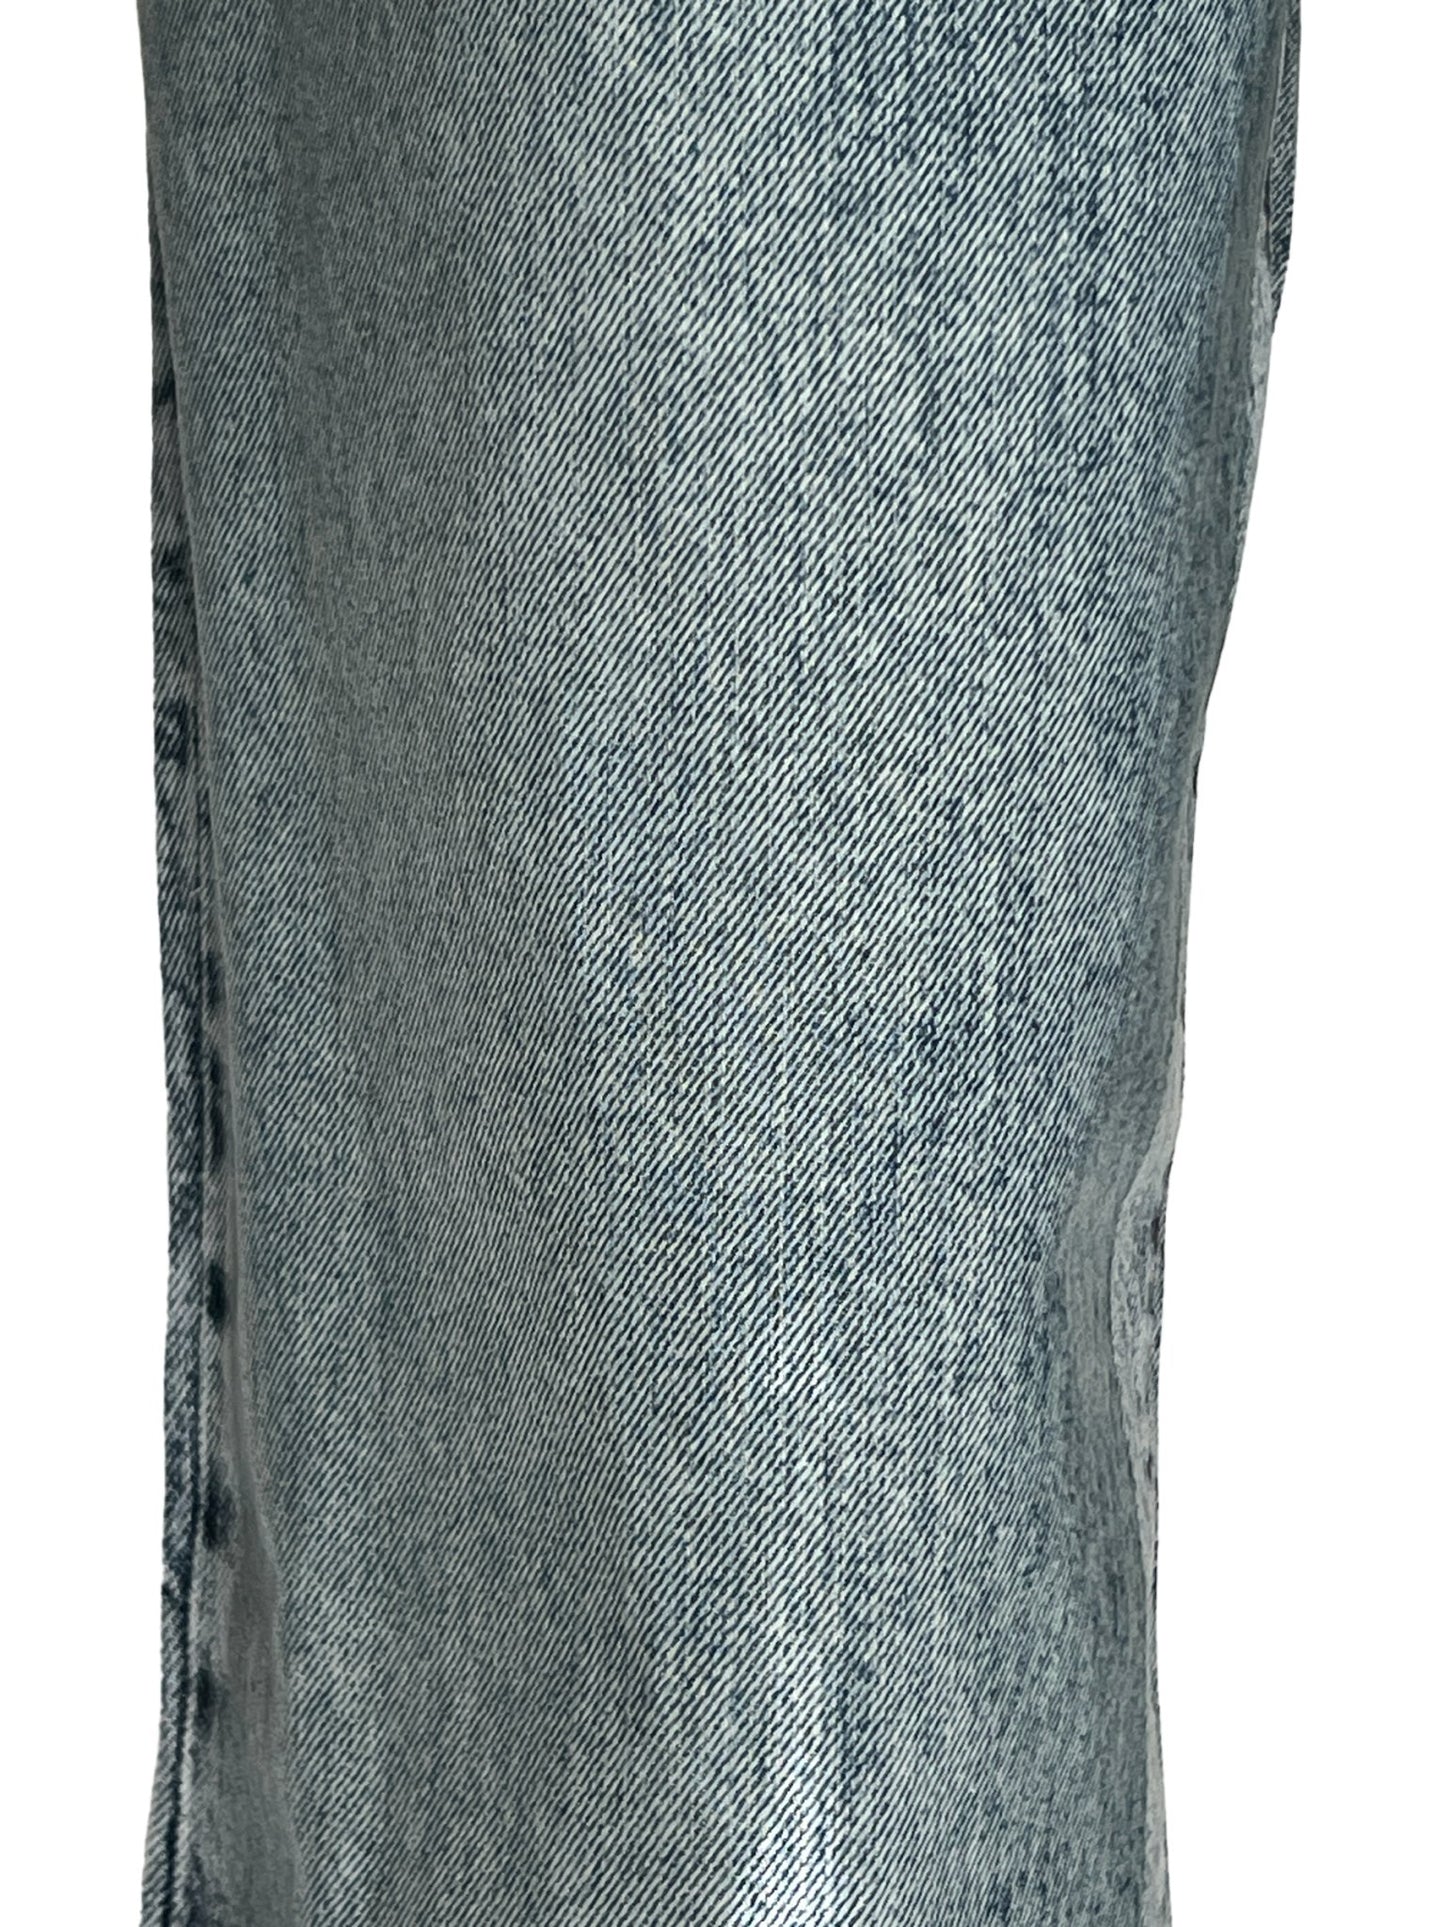 Close-up of Diesel light wash blue denim fabric with visible texture and seam details.